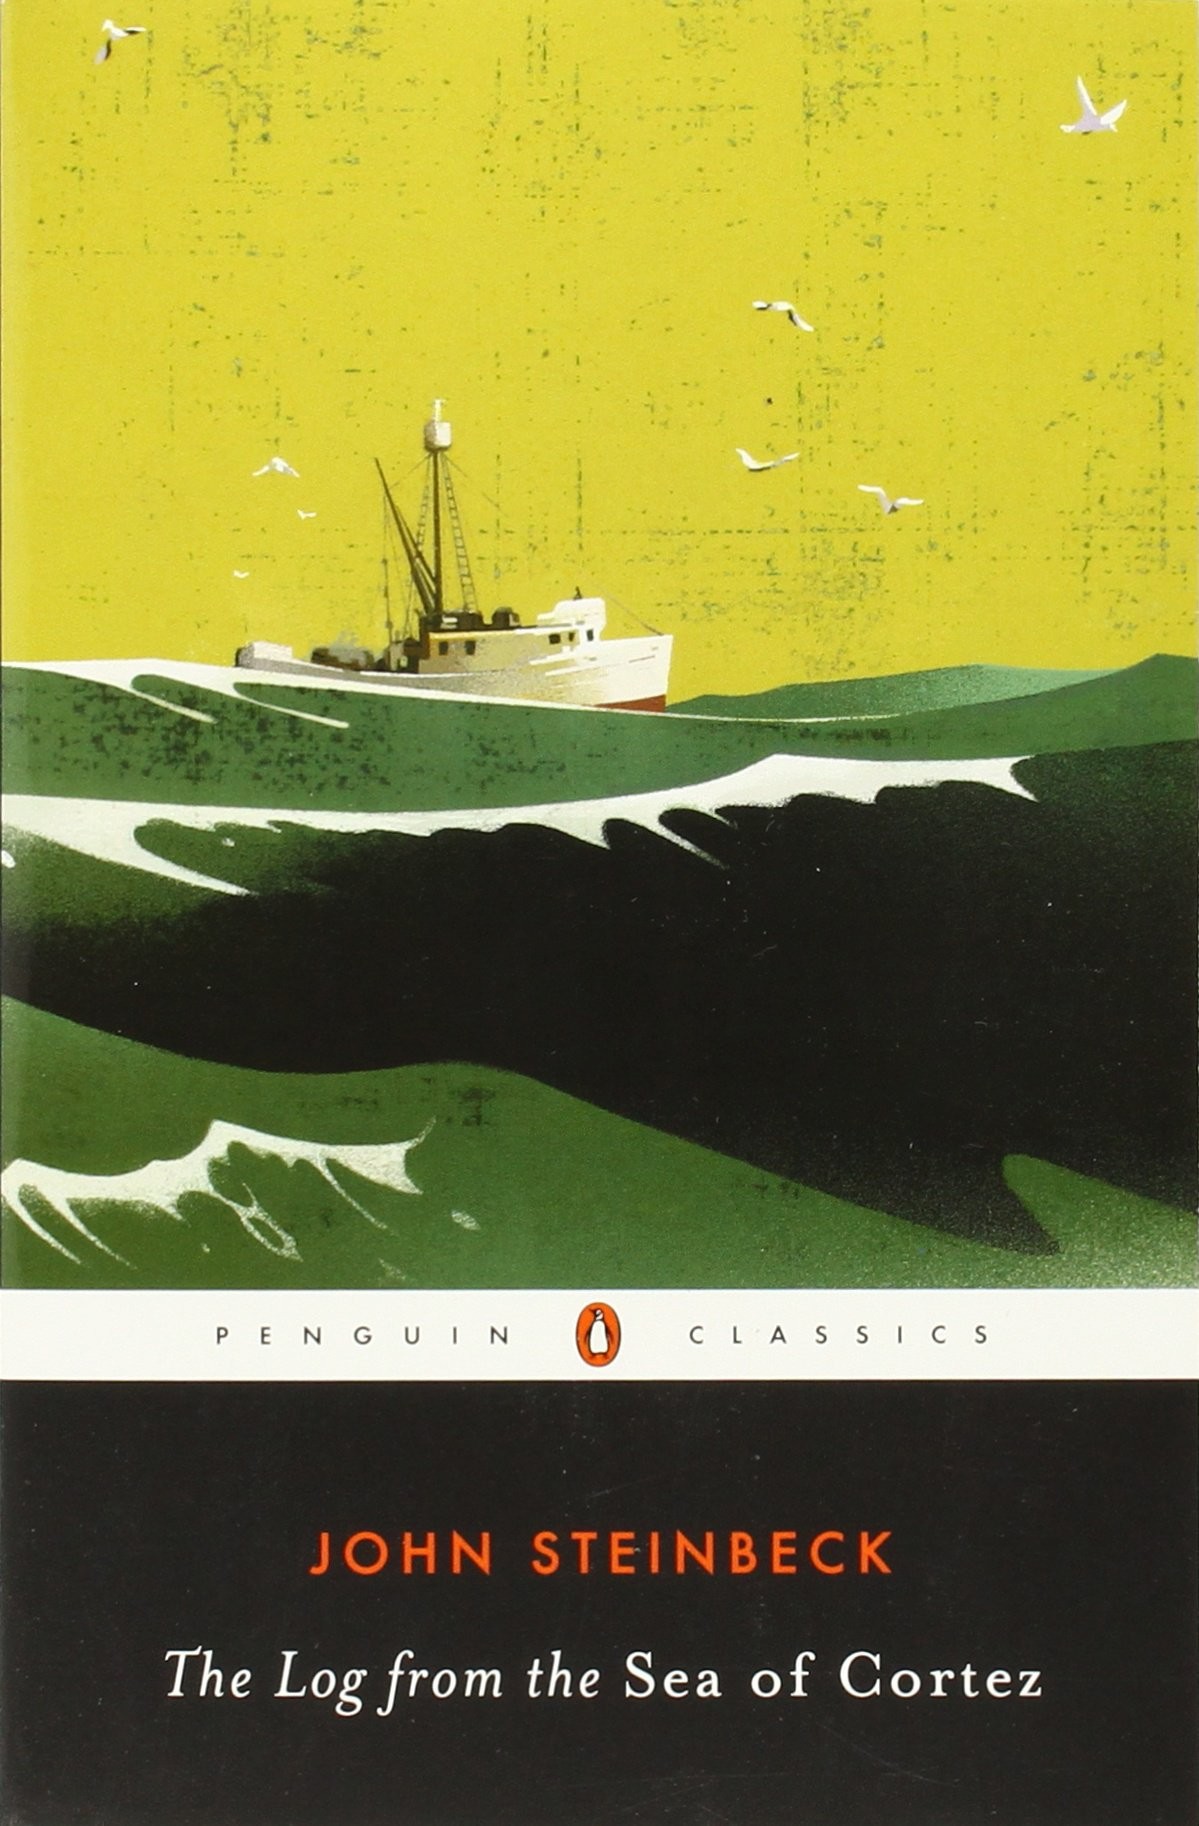 The Log From the Sea of Cortez (Penguin Classics) by John Steinbeck